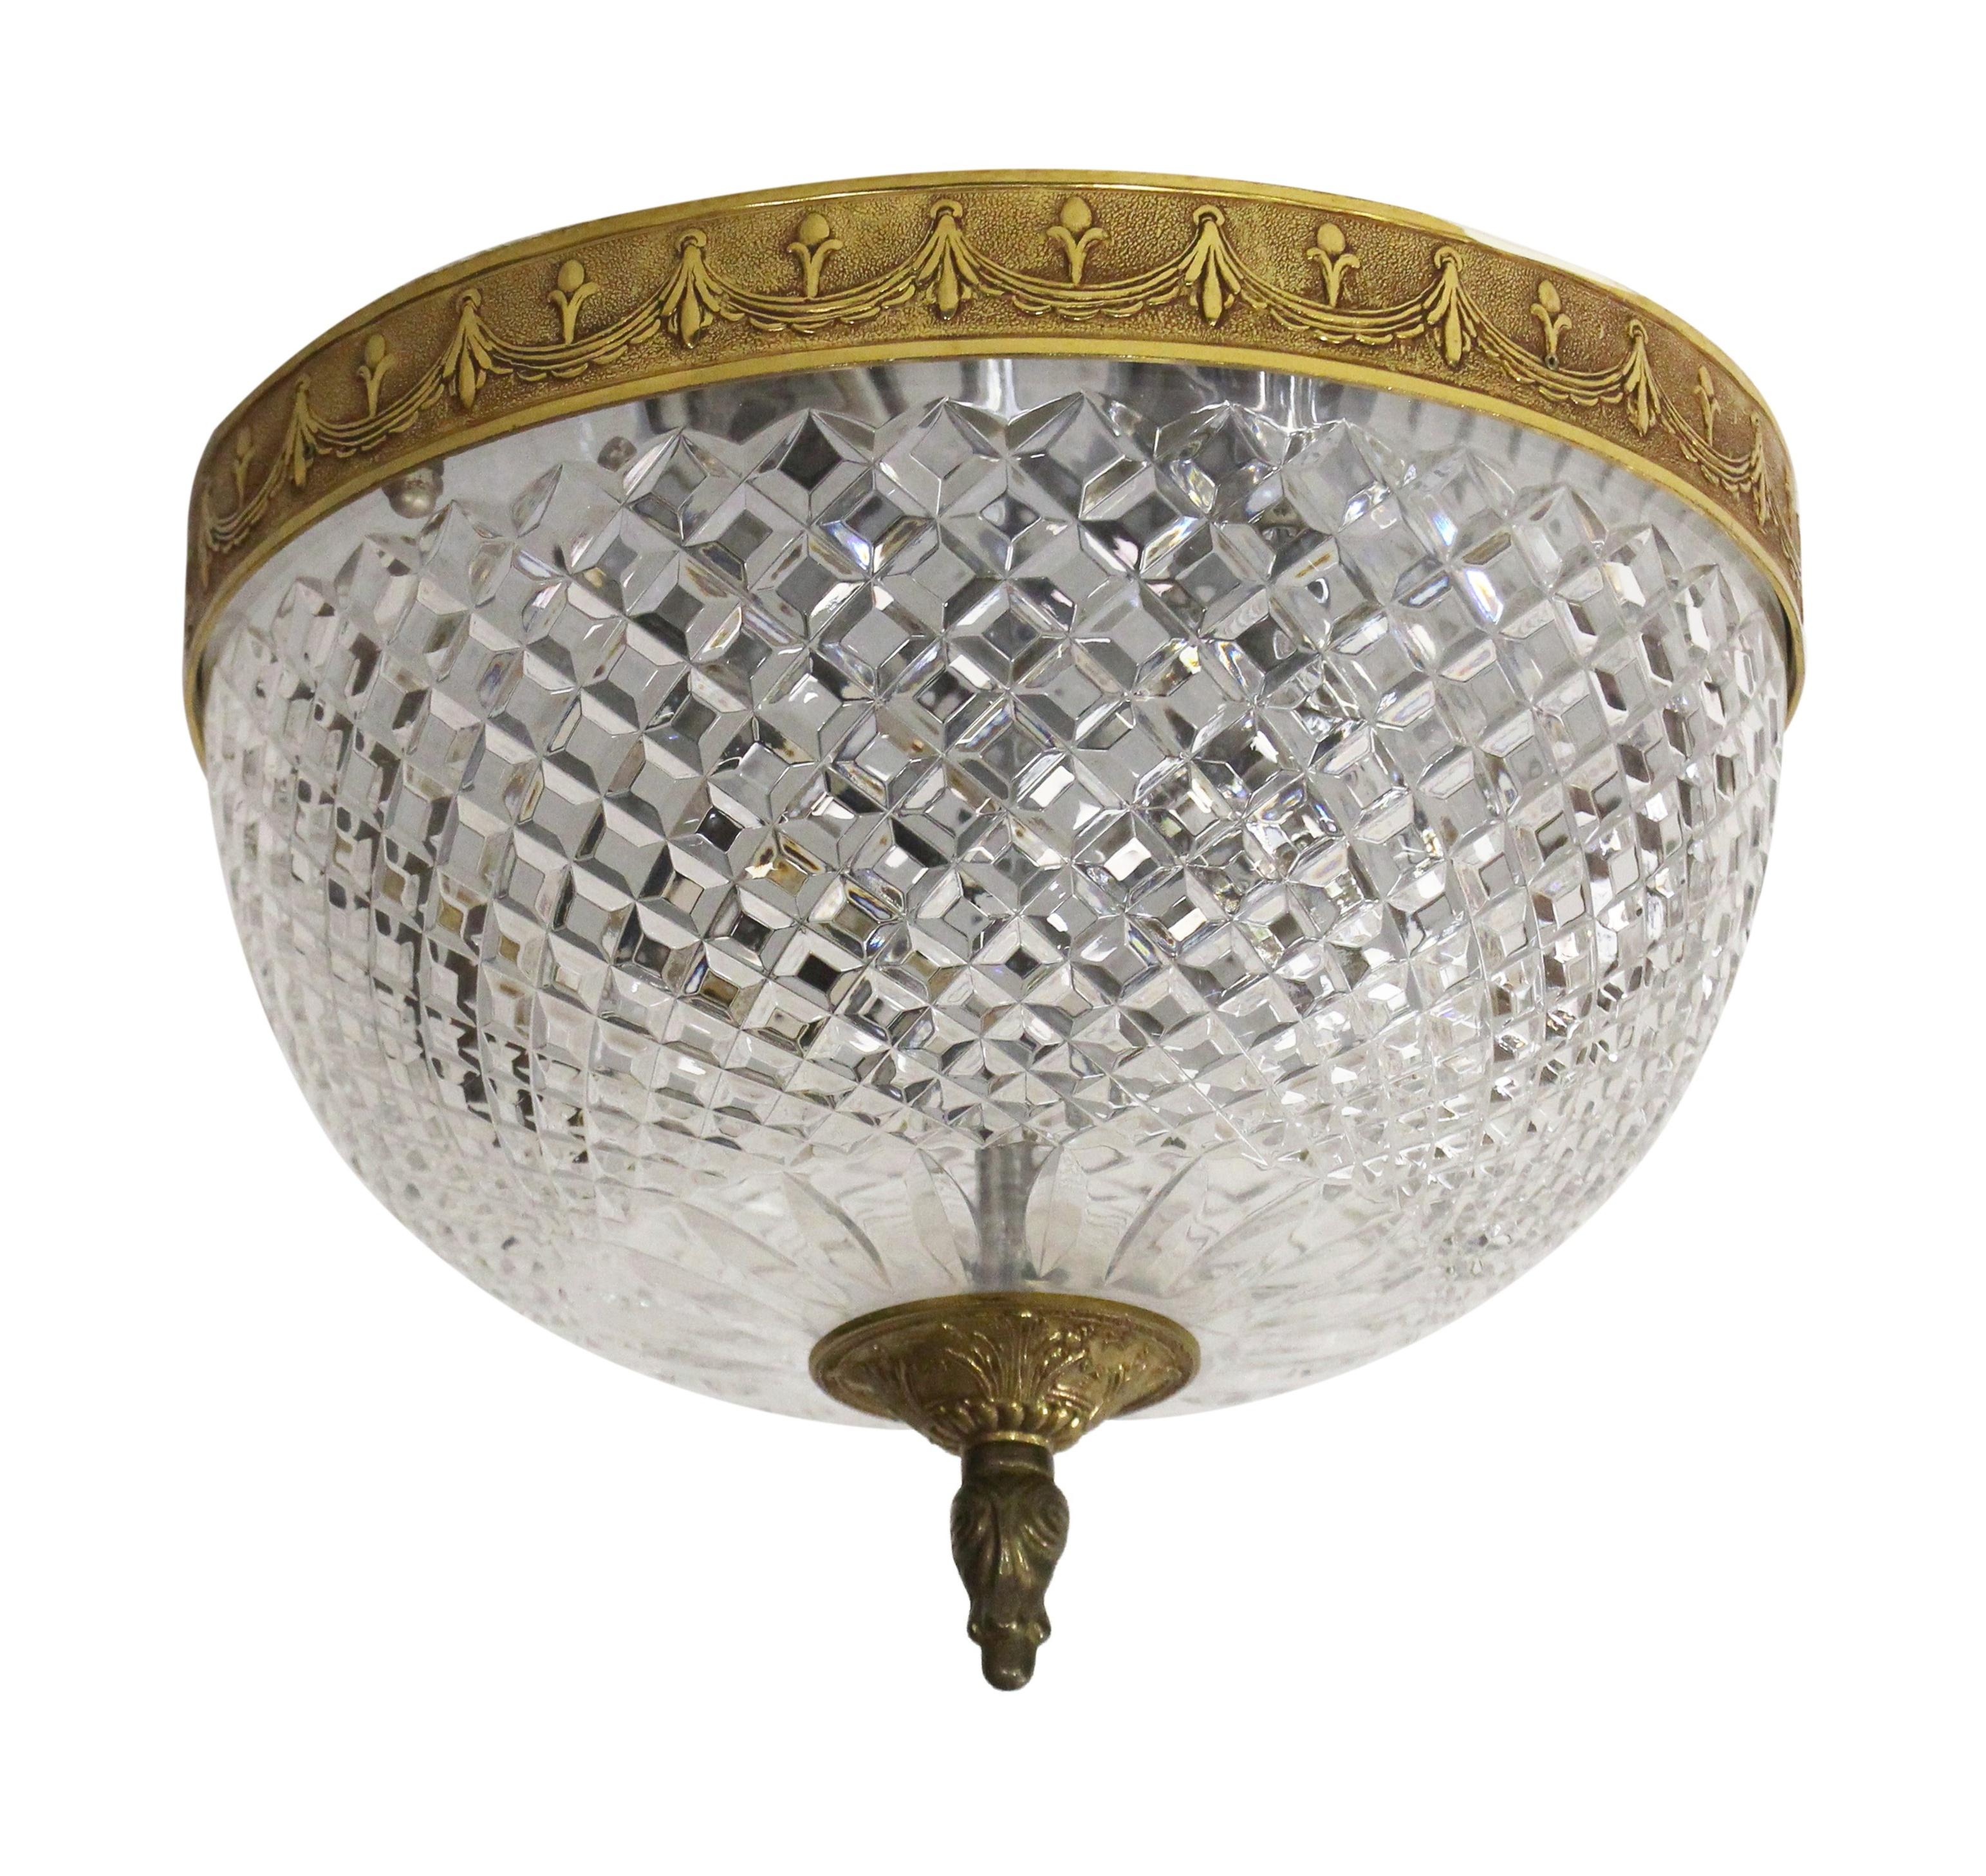 Clear crystal Italian flush mount light with a brass decorative rim and finial from the 1980s. Reclaimed from the corridors of the Towers of NYC Waldorf Astoria Hotel. A Waldorf Astoria authenticity card included with your purchase. Small quantity